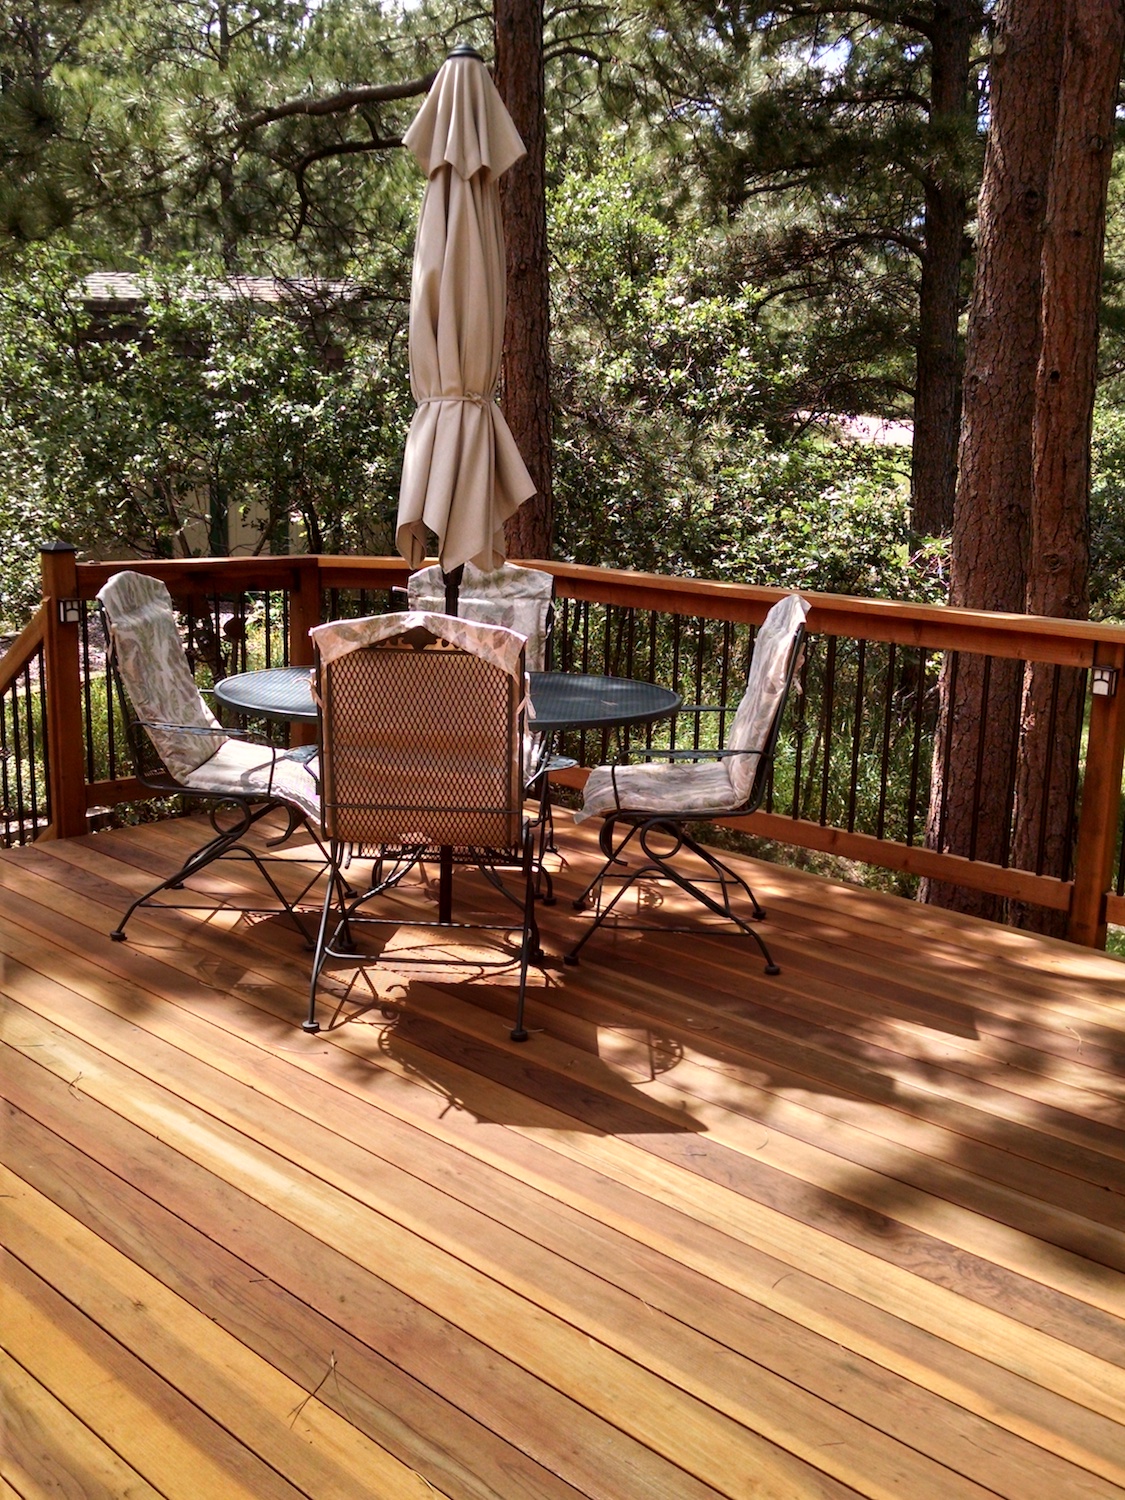 Redwood deck in the forest with a dinging area